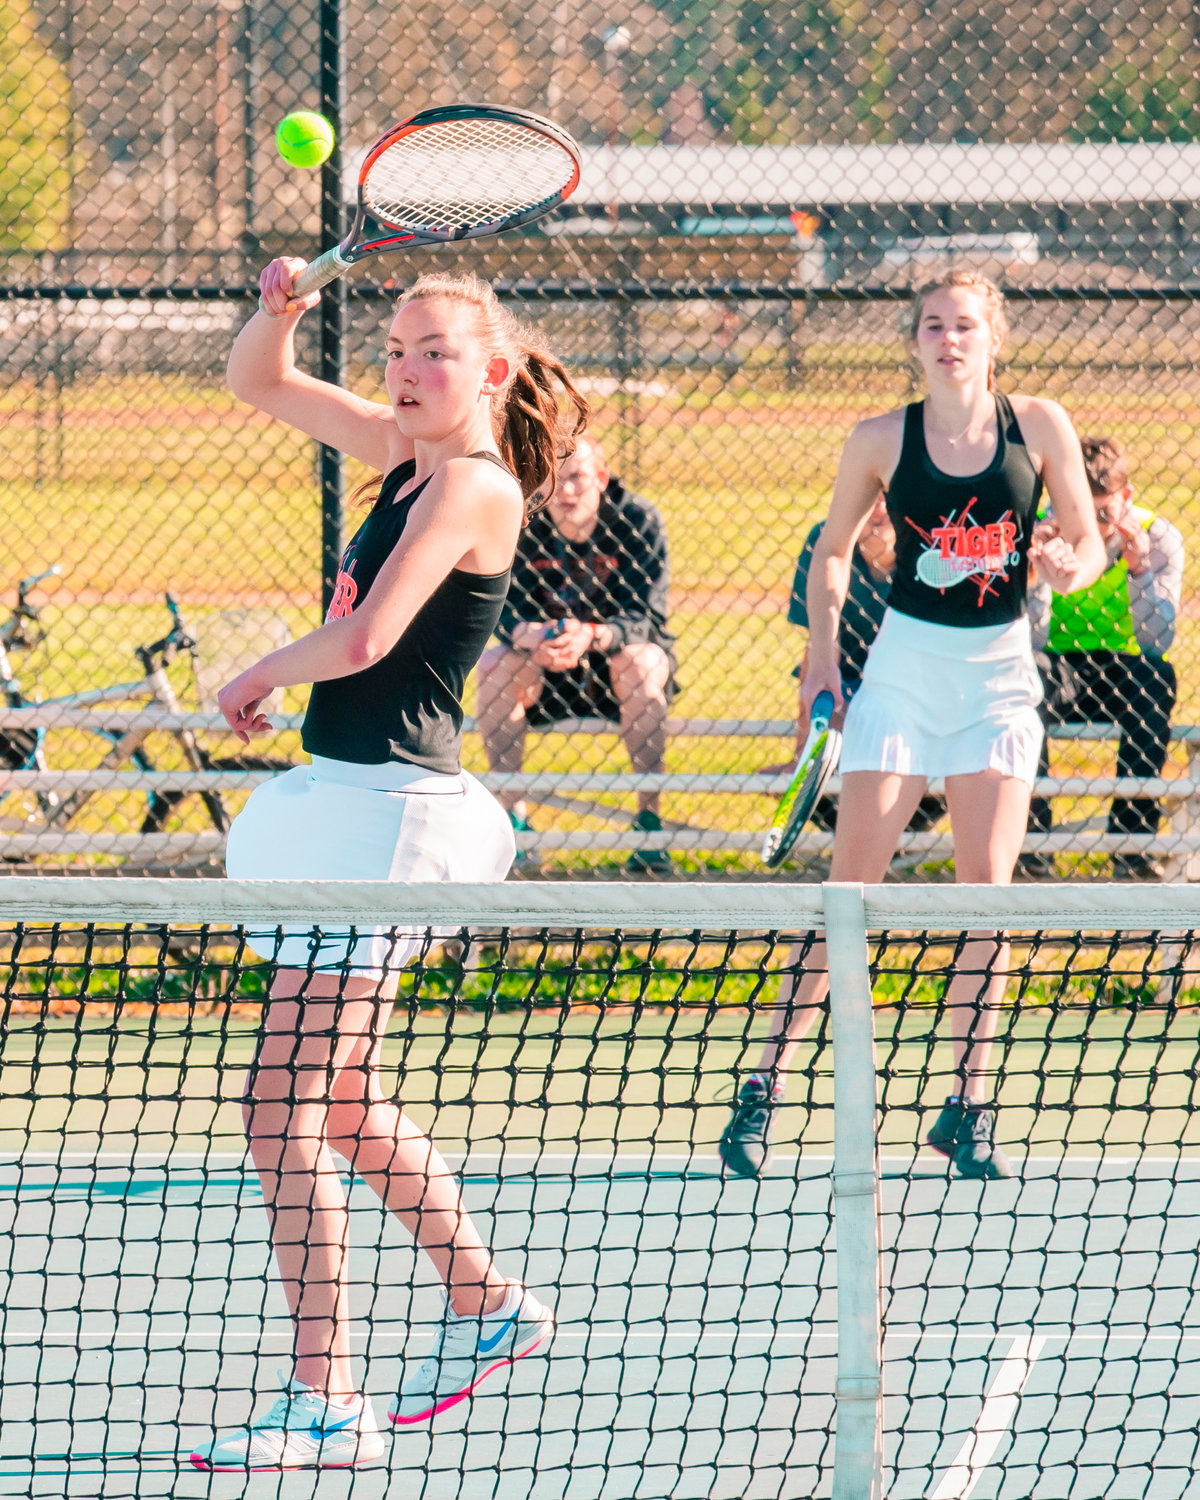 Centralia’s Maya O’Dell returns a ball during a doubles match with Maddie Corwin on Wednesday.